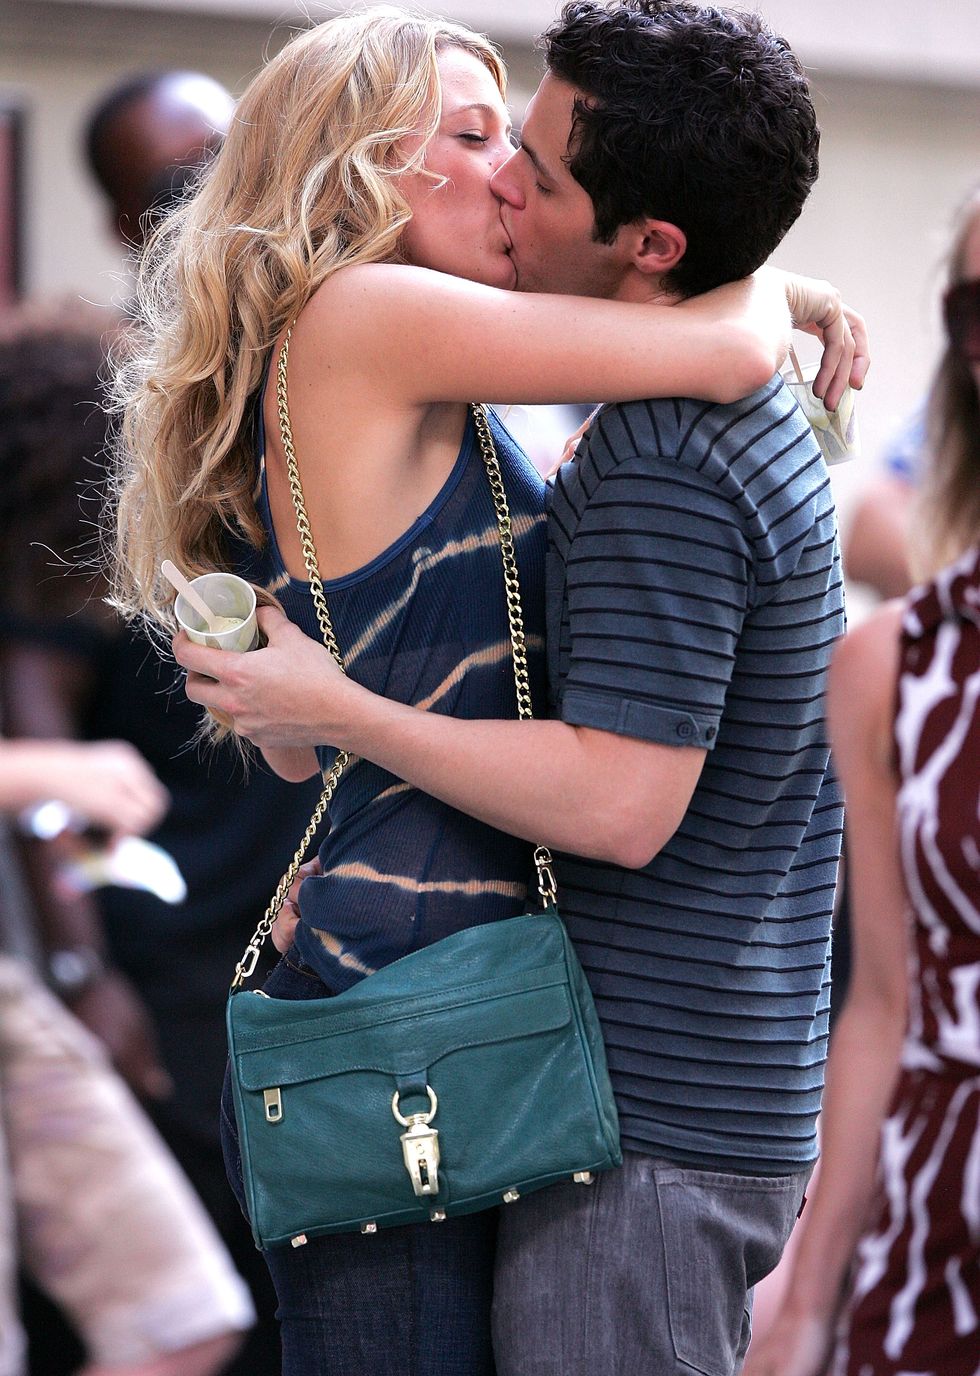 blake lively and penn badgley on location for "gossip girl" on july 15, 2008